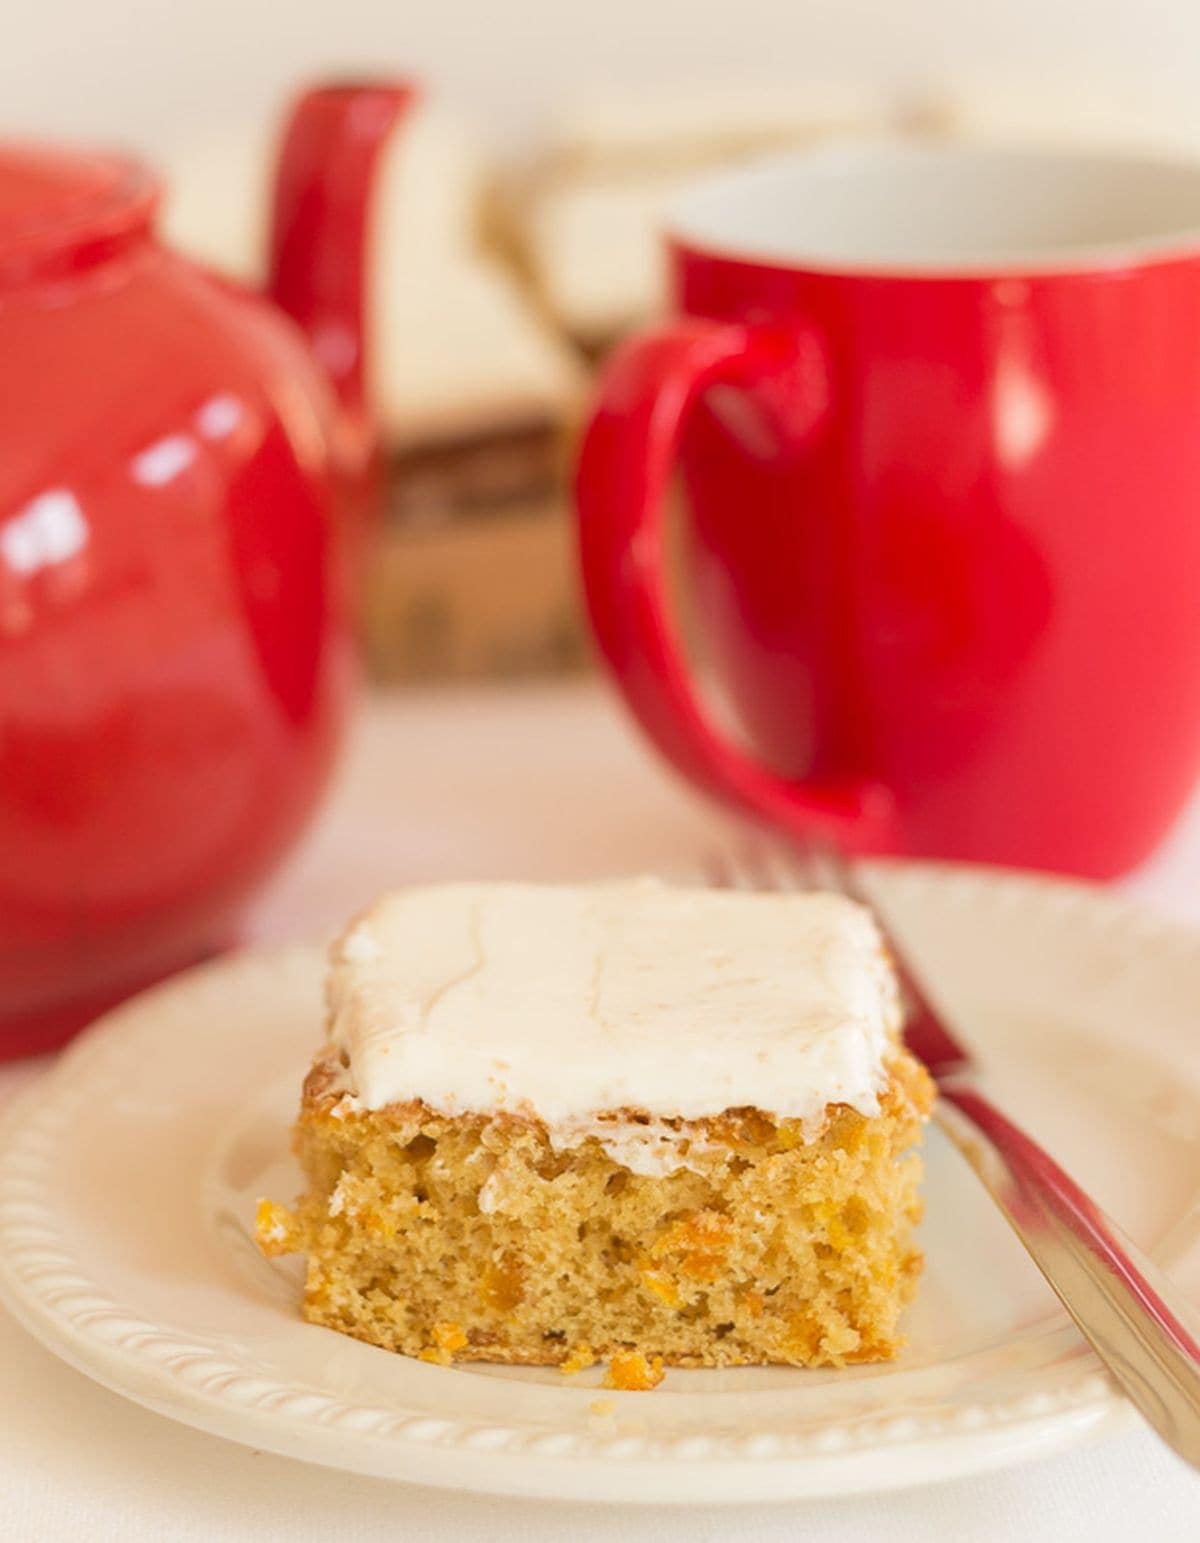 A slice of orange and apricot tray bake on a white plate with a pot of tea and cup in the background.